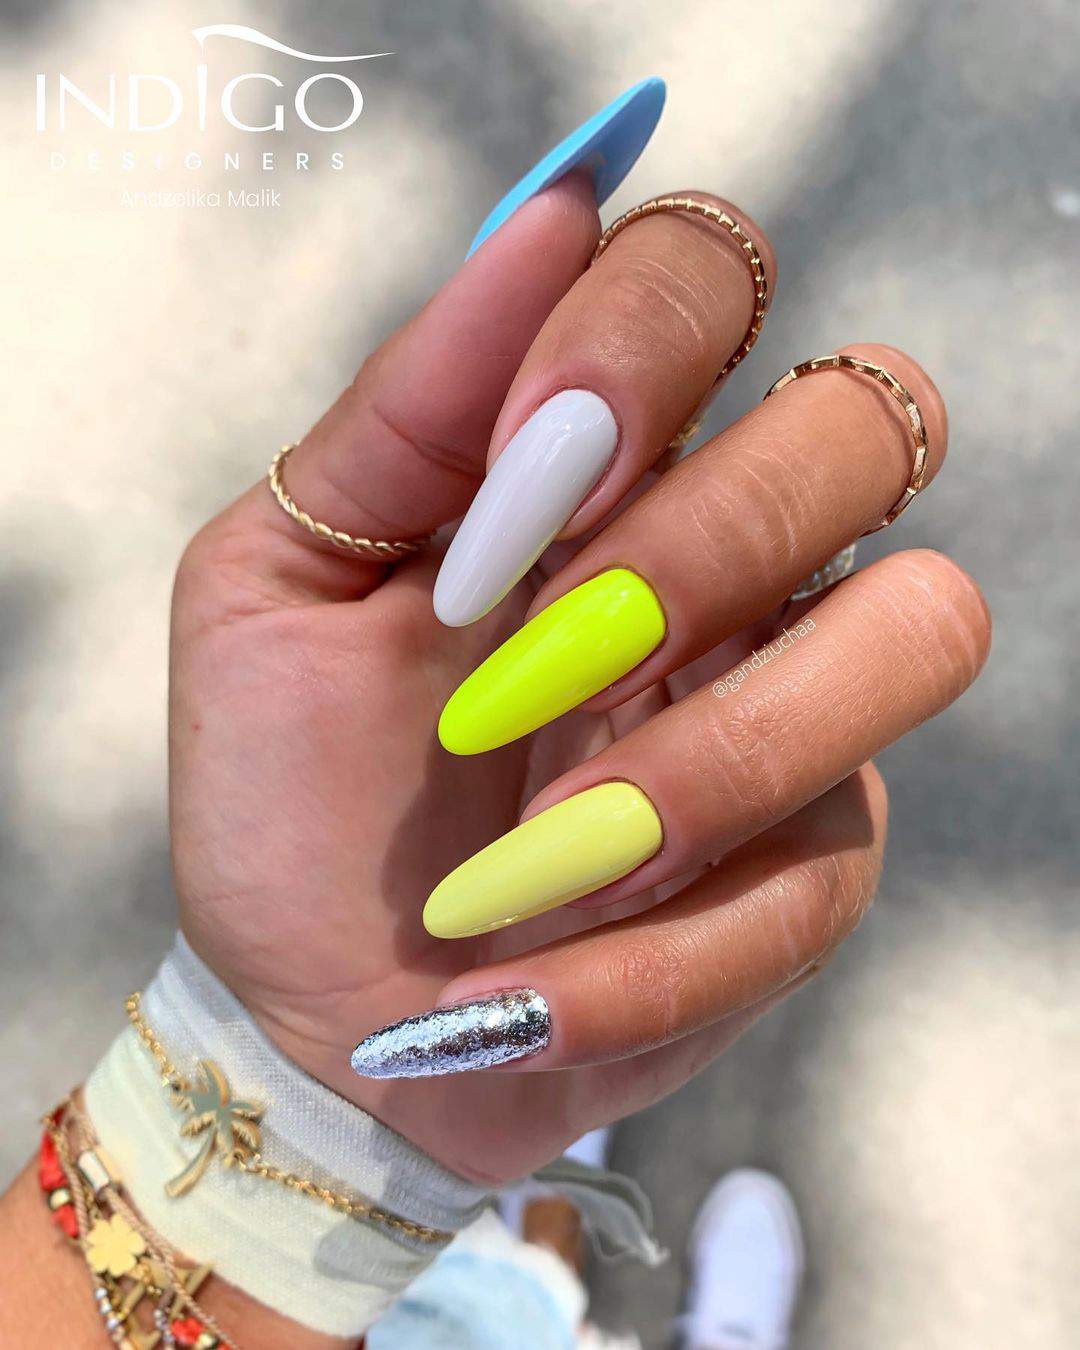 30+ Best Summer 2021 Nail Trends And Manicure Ideas images 21